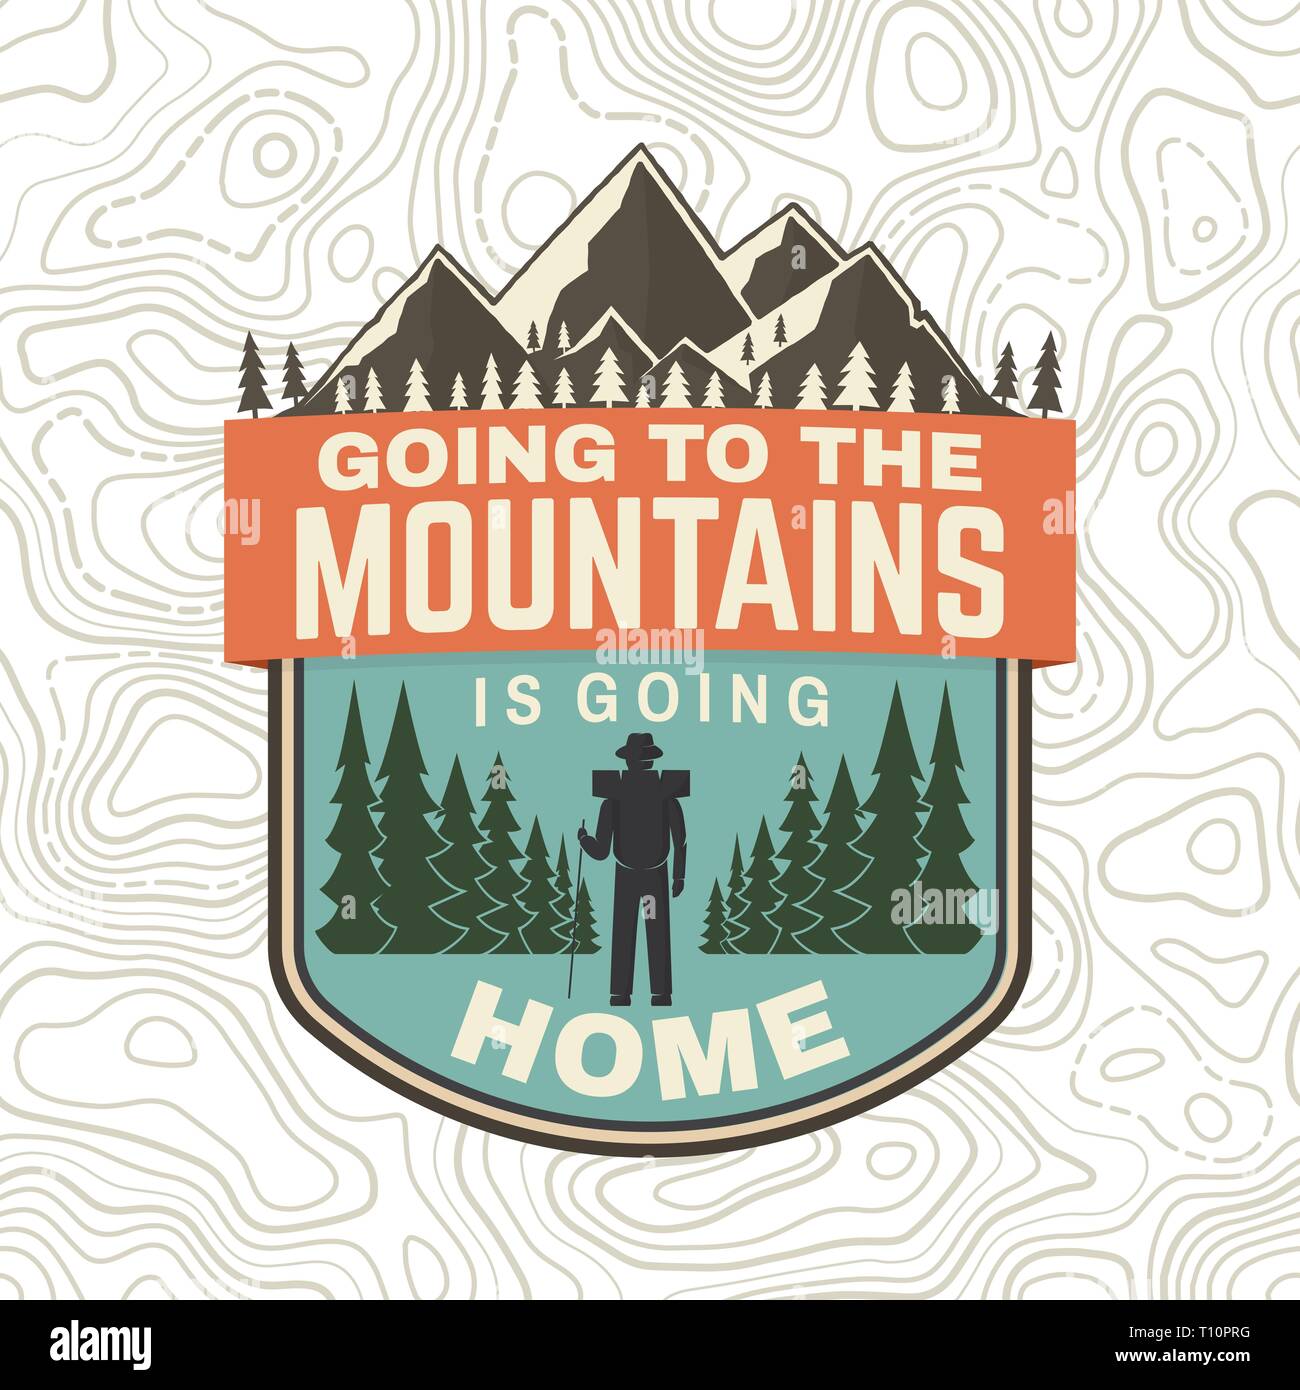 Going to the mountains is going home. Vector. Concept for shirt or badge, overlay, patch, stamp or tee. Vintage typography design with hiker, mountains and forest silhouette. Outdoor adventure symbol Stock Vector